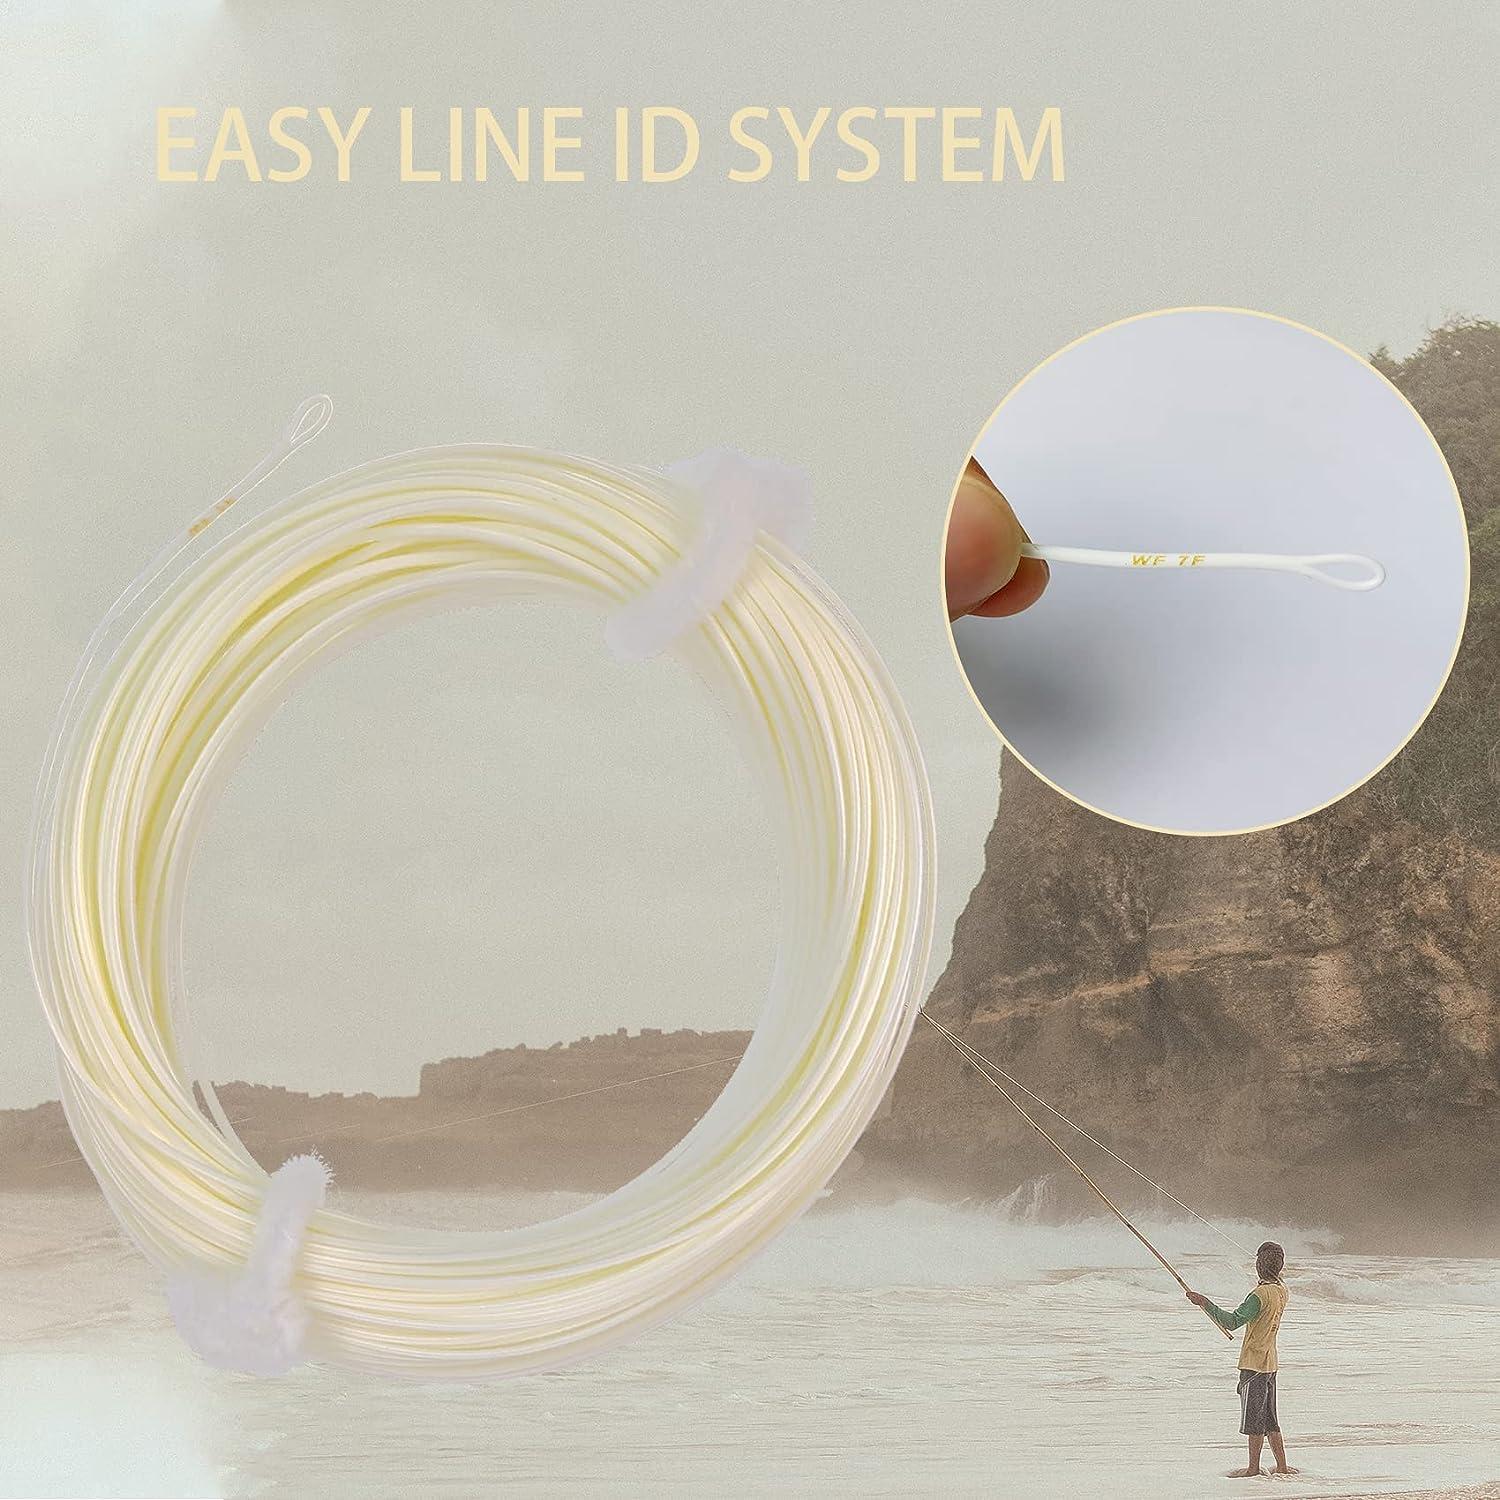 EUPHNG All-Purpose Fly Line Floating WF2 3 4 5 6 7 100FT with Welded Loop &  Line ID Weight Forward Fly Fishing Line Milk White WF2F